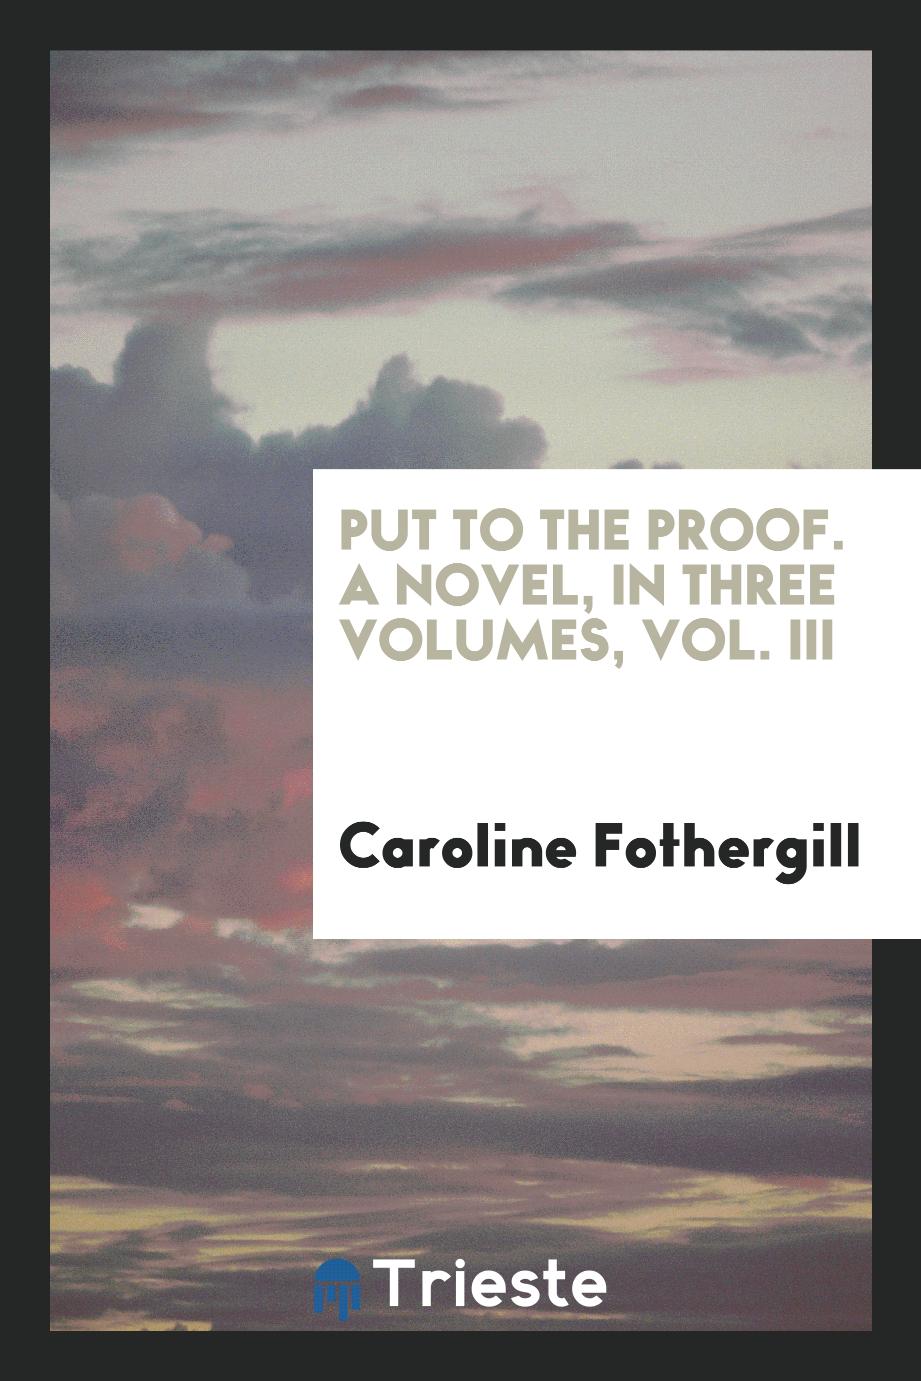 Put to the proof. A novel, in three volumes, Vol. III